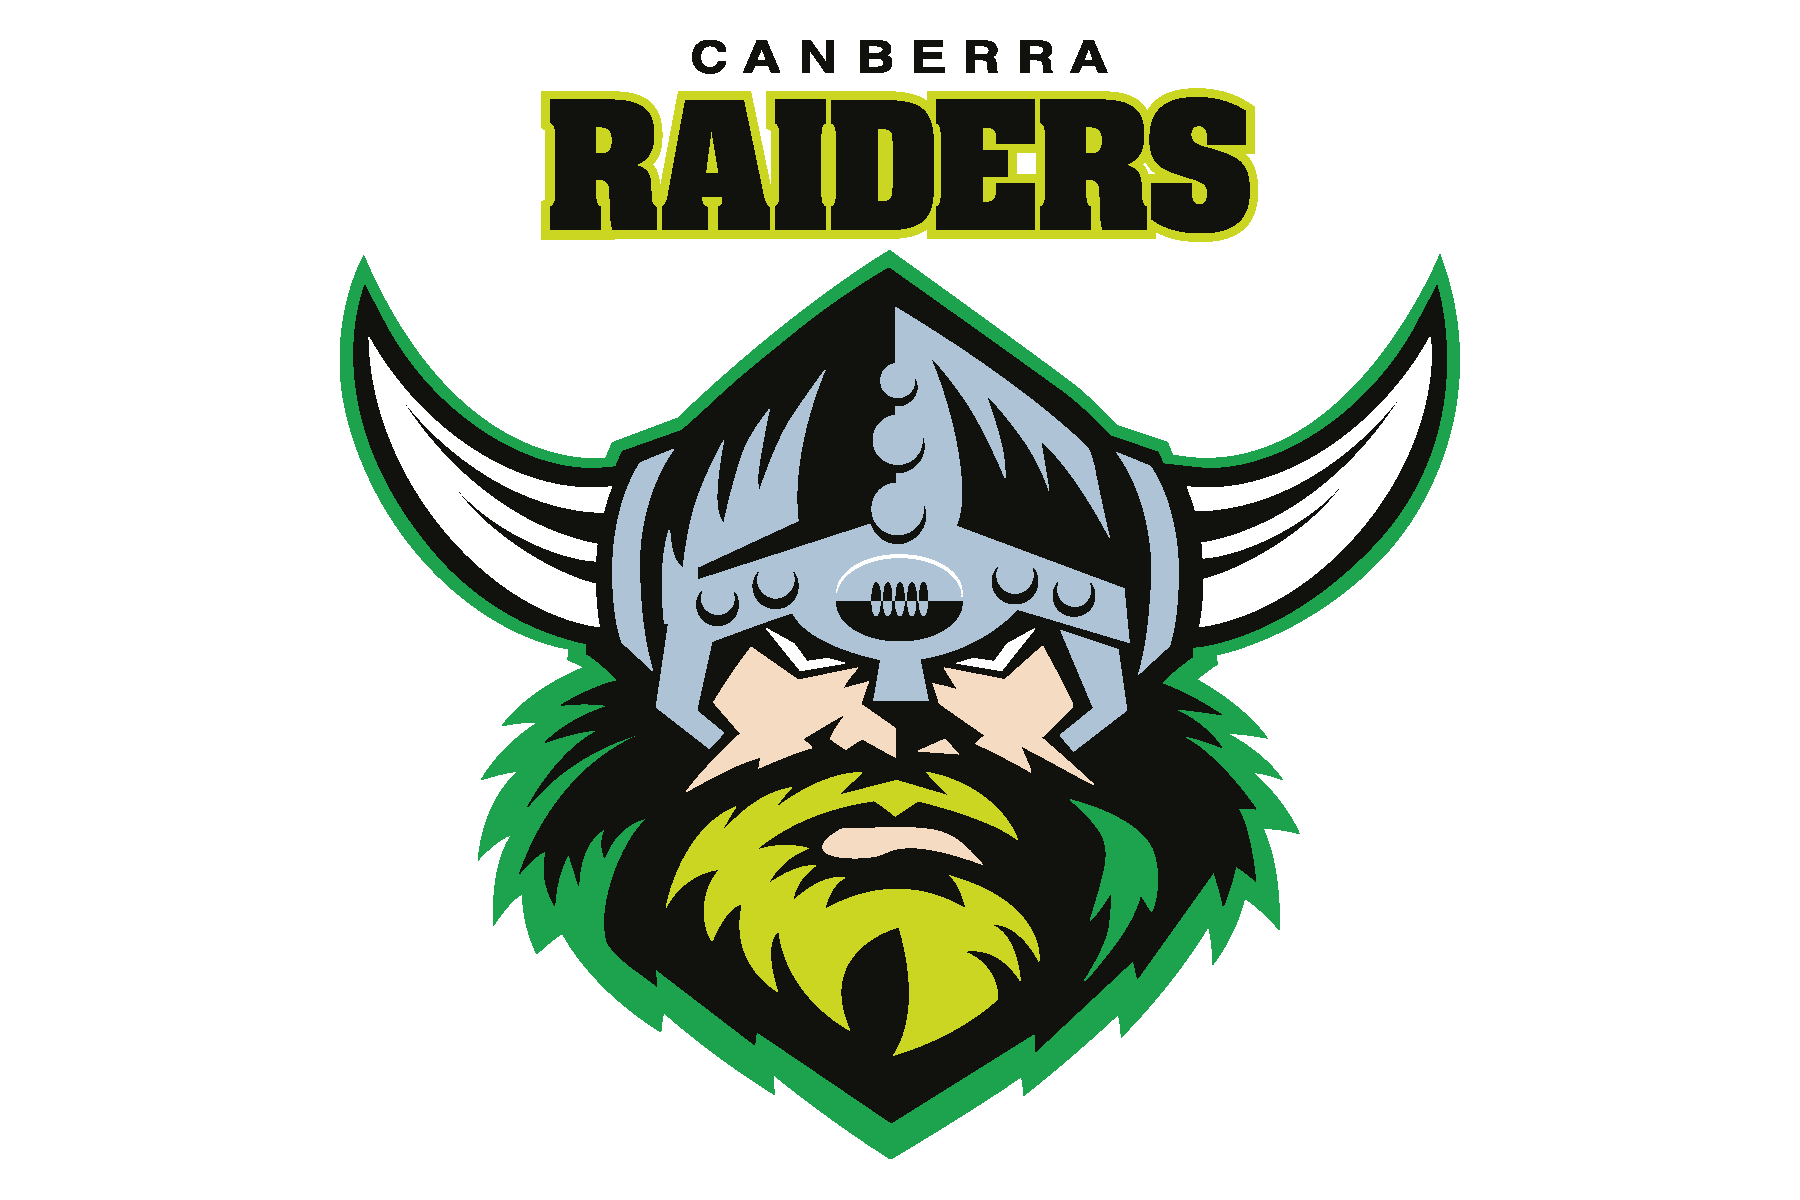 Canberra-Raiders-Logo-2000.png